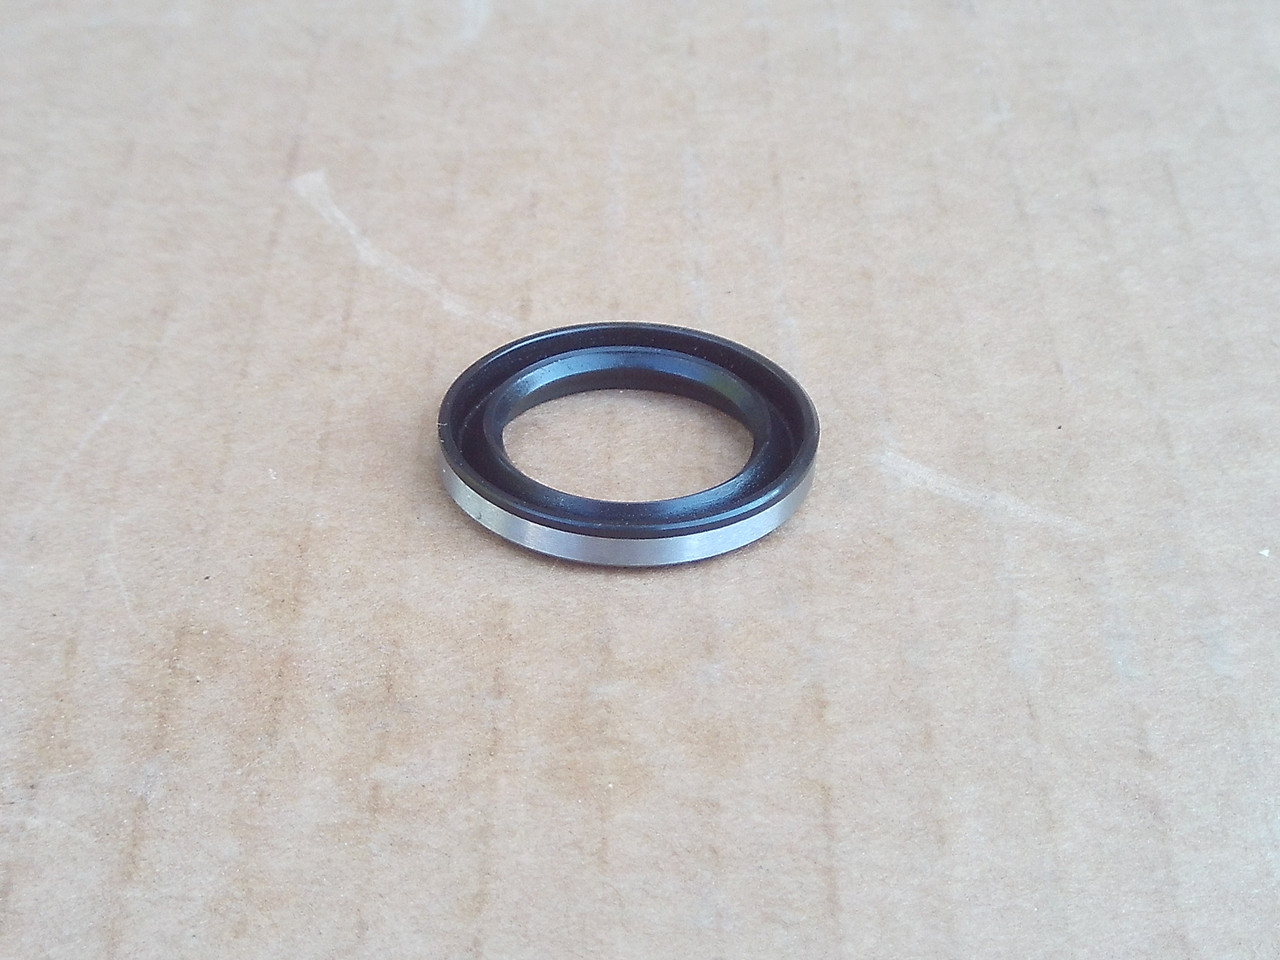 Crankshaft Oil Seal for Briggs and Stratton 299819, 299819S, 4116, 89660 &